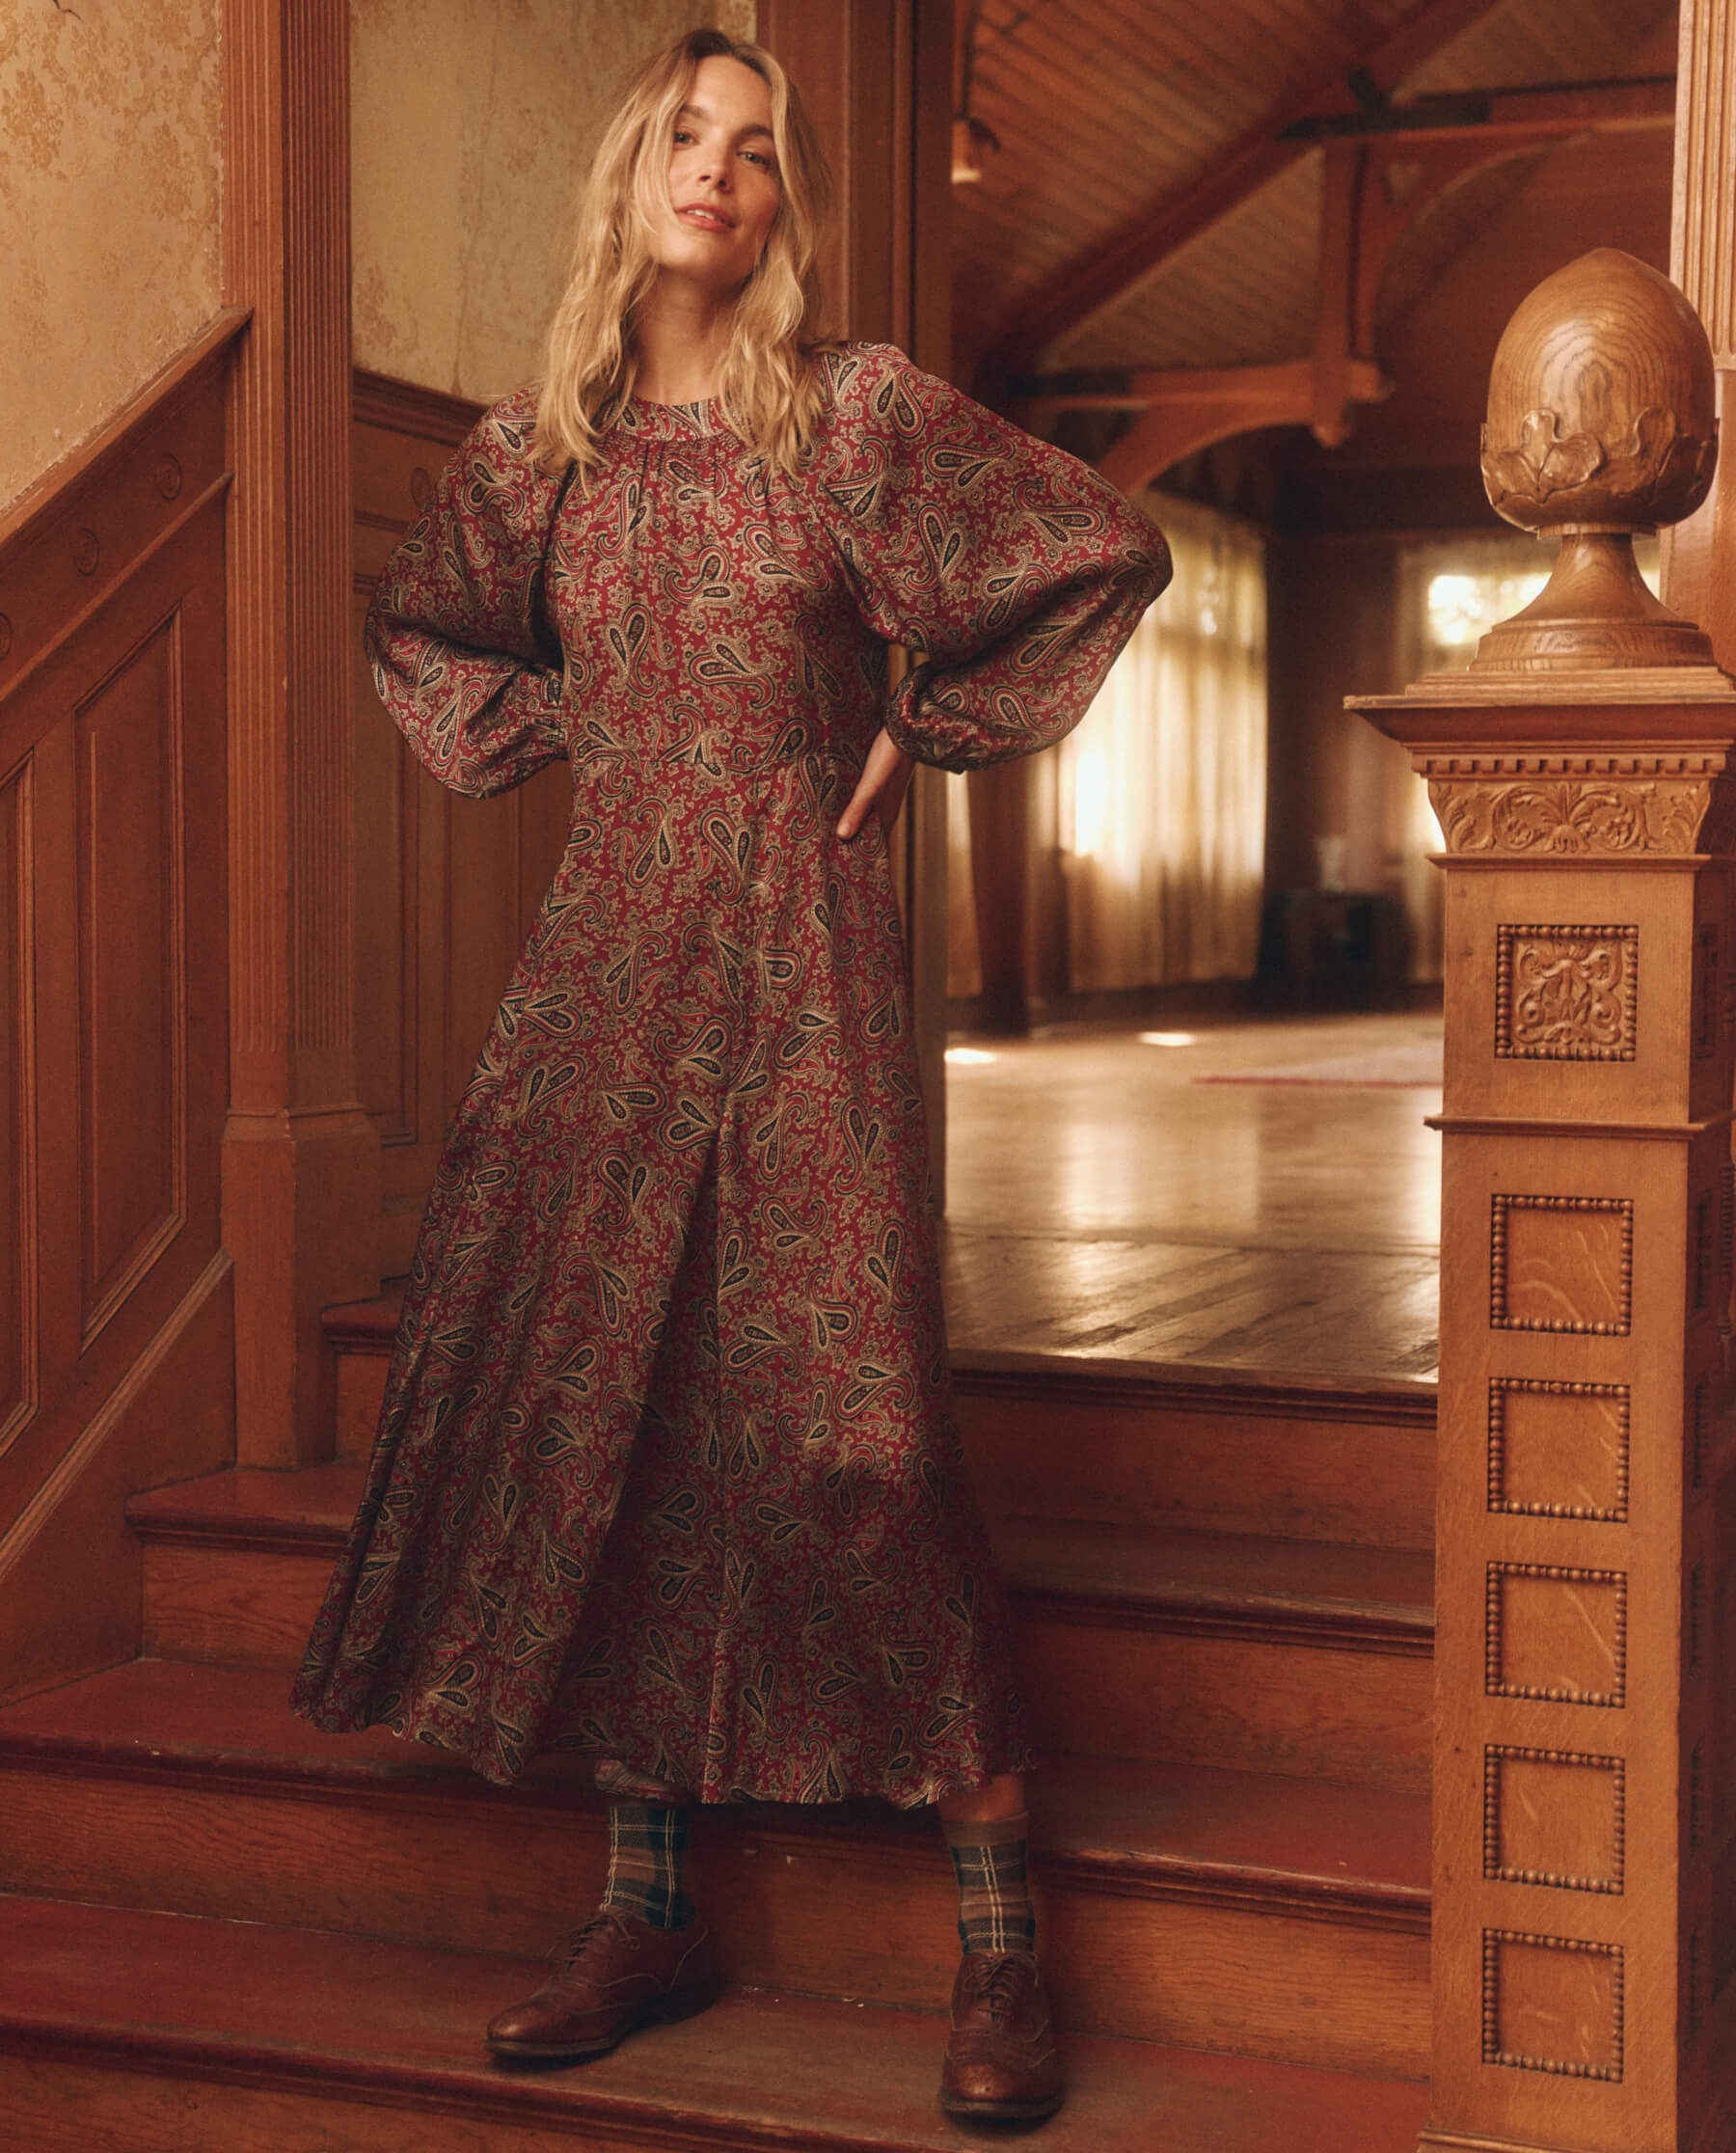 The Naples Dress. -- Festive Paisley – The Great.